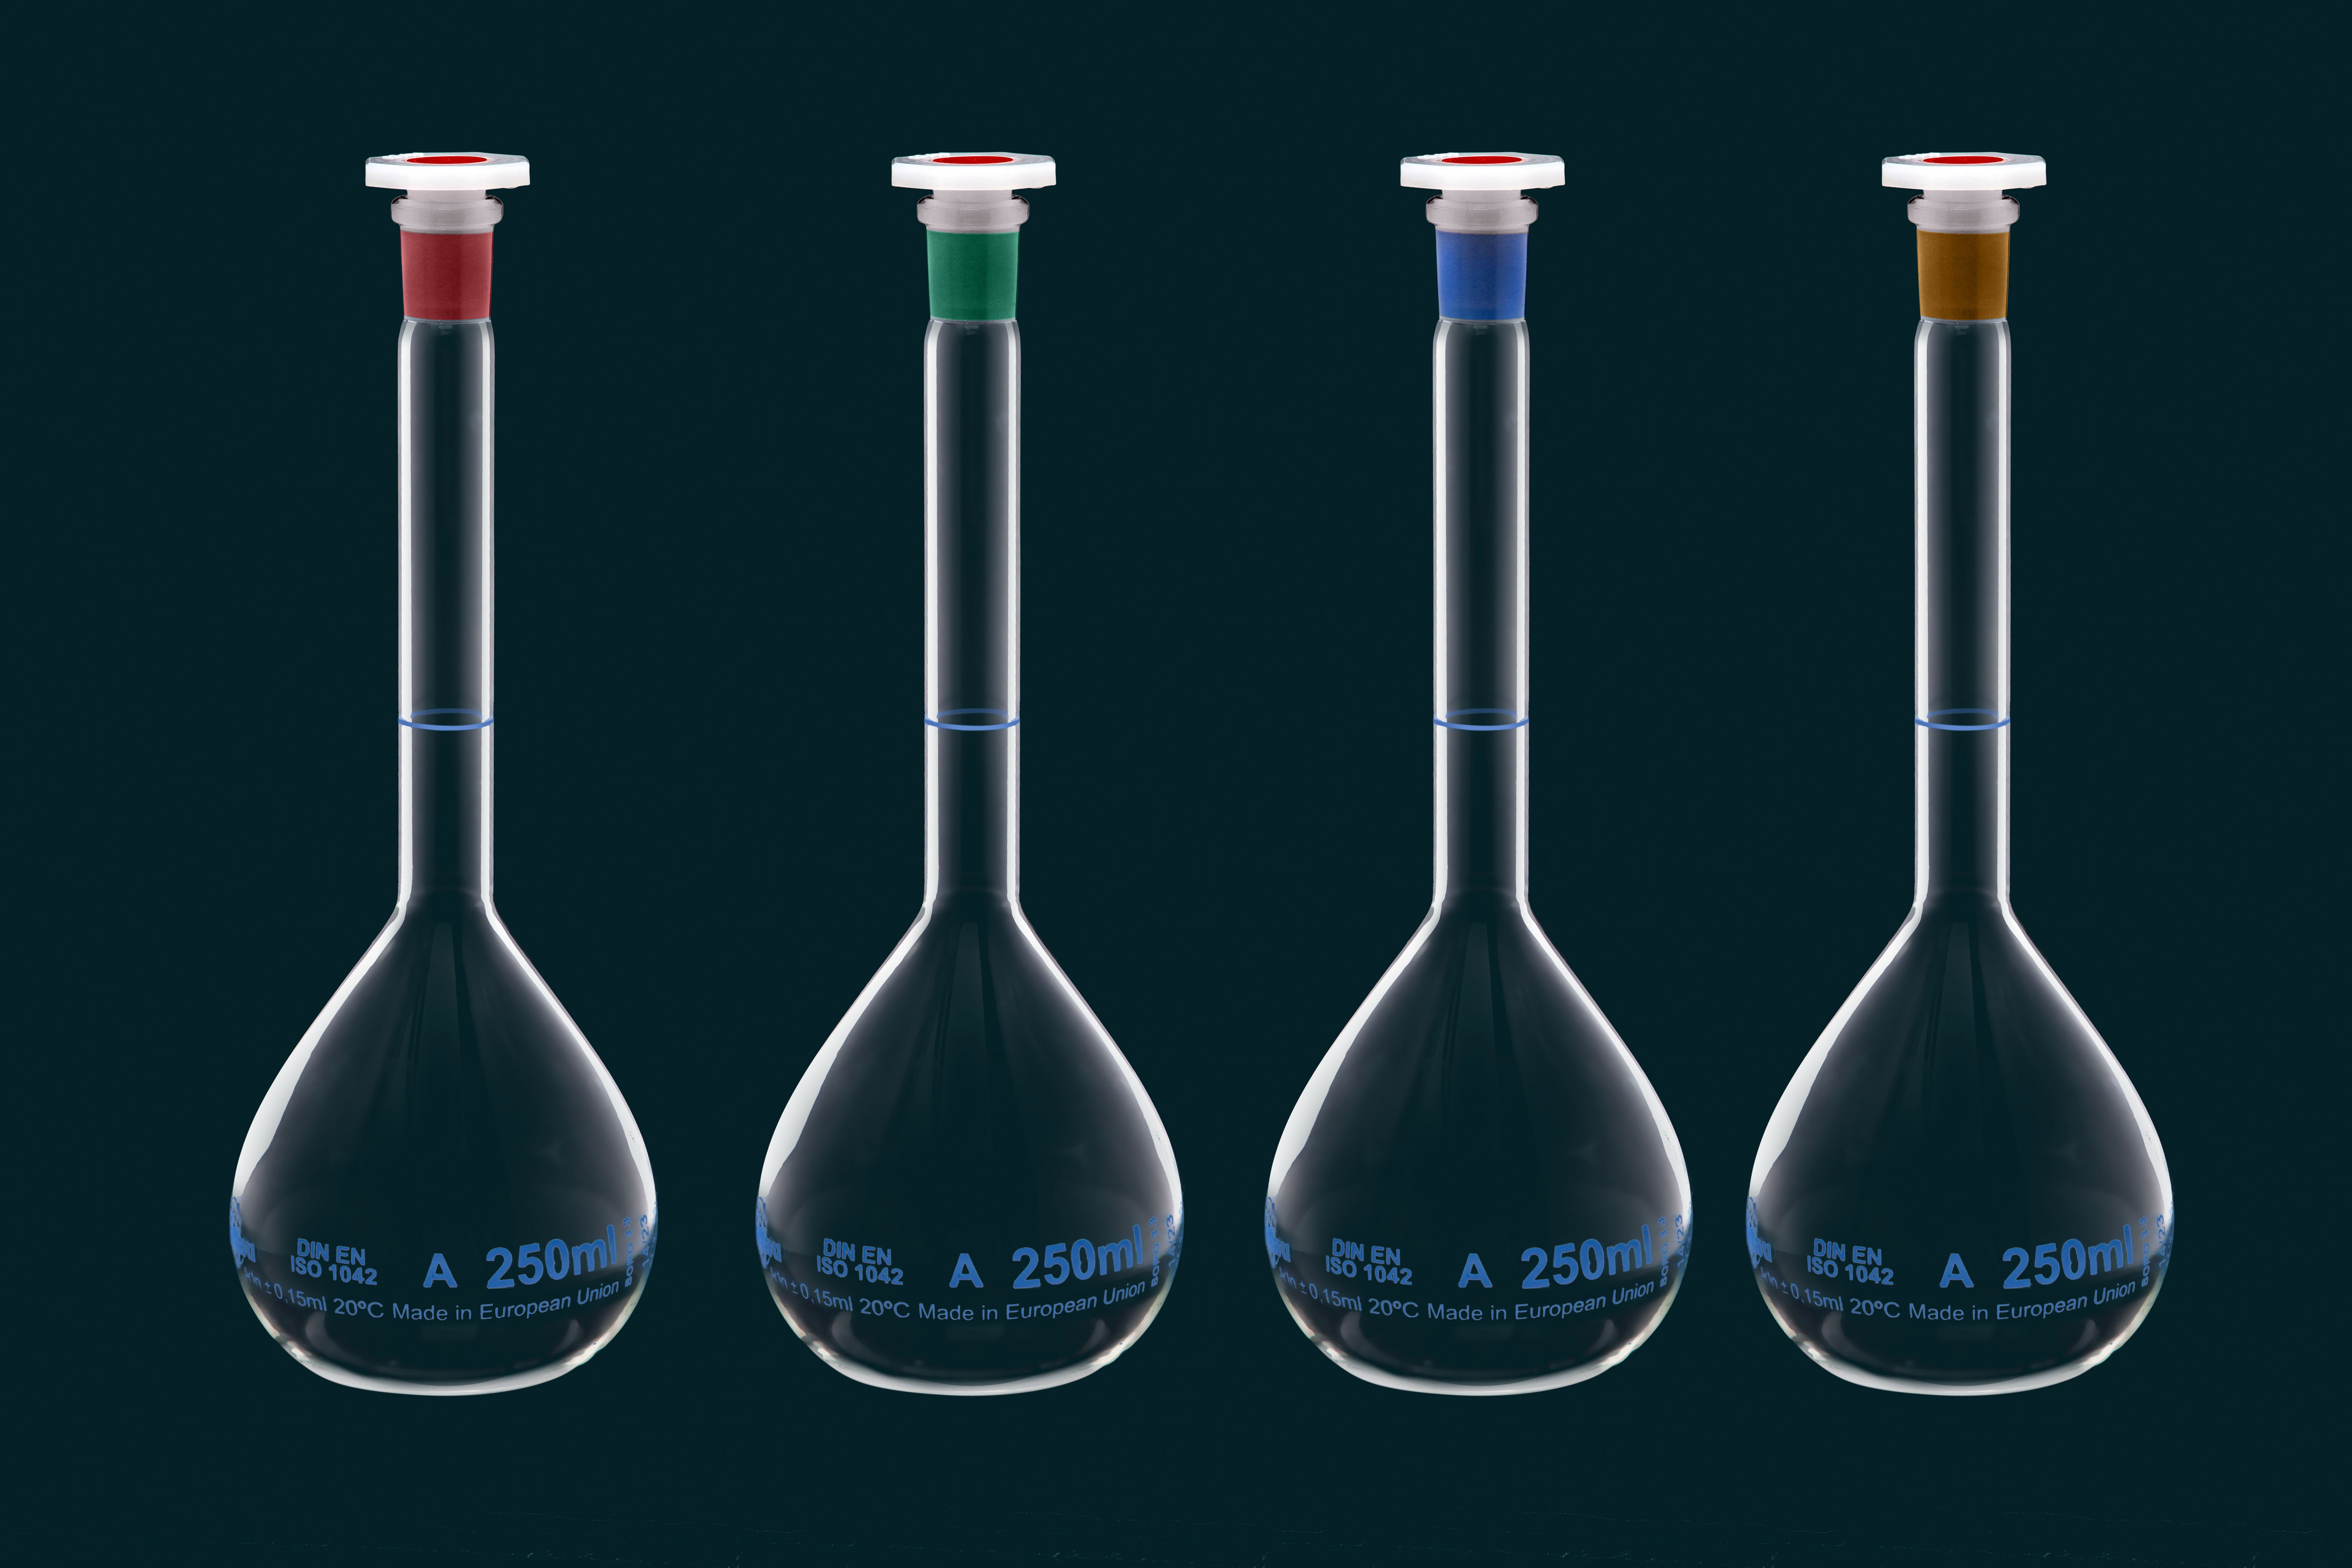 Volumetric flask with red neck, Class A, 200 ml, with PE stopper, lot number and certificate of conformity